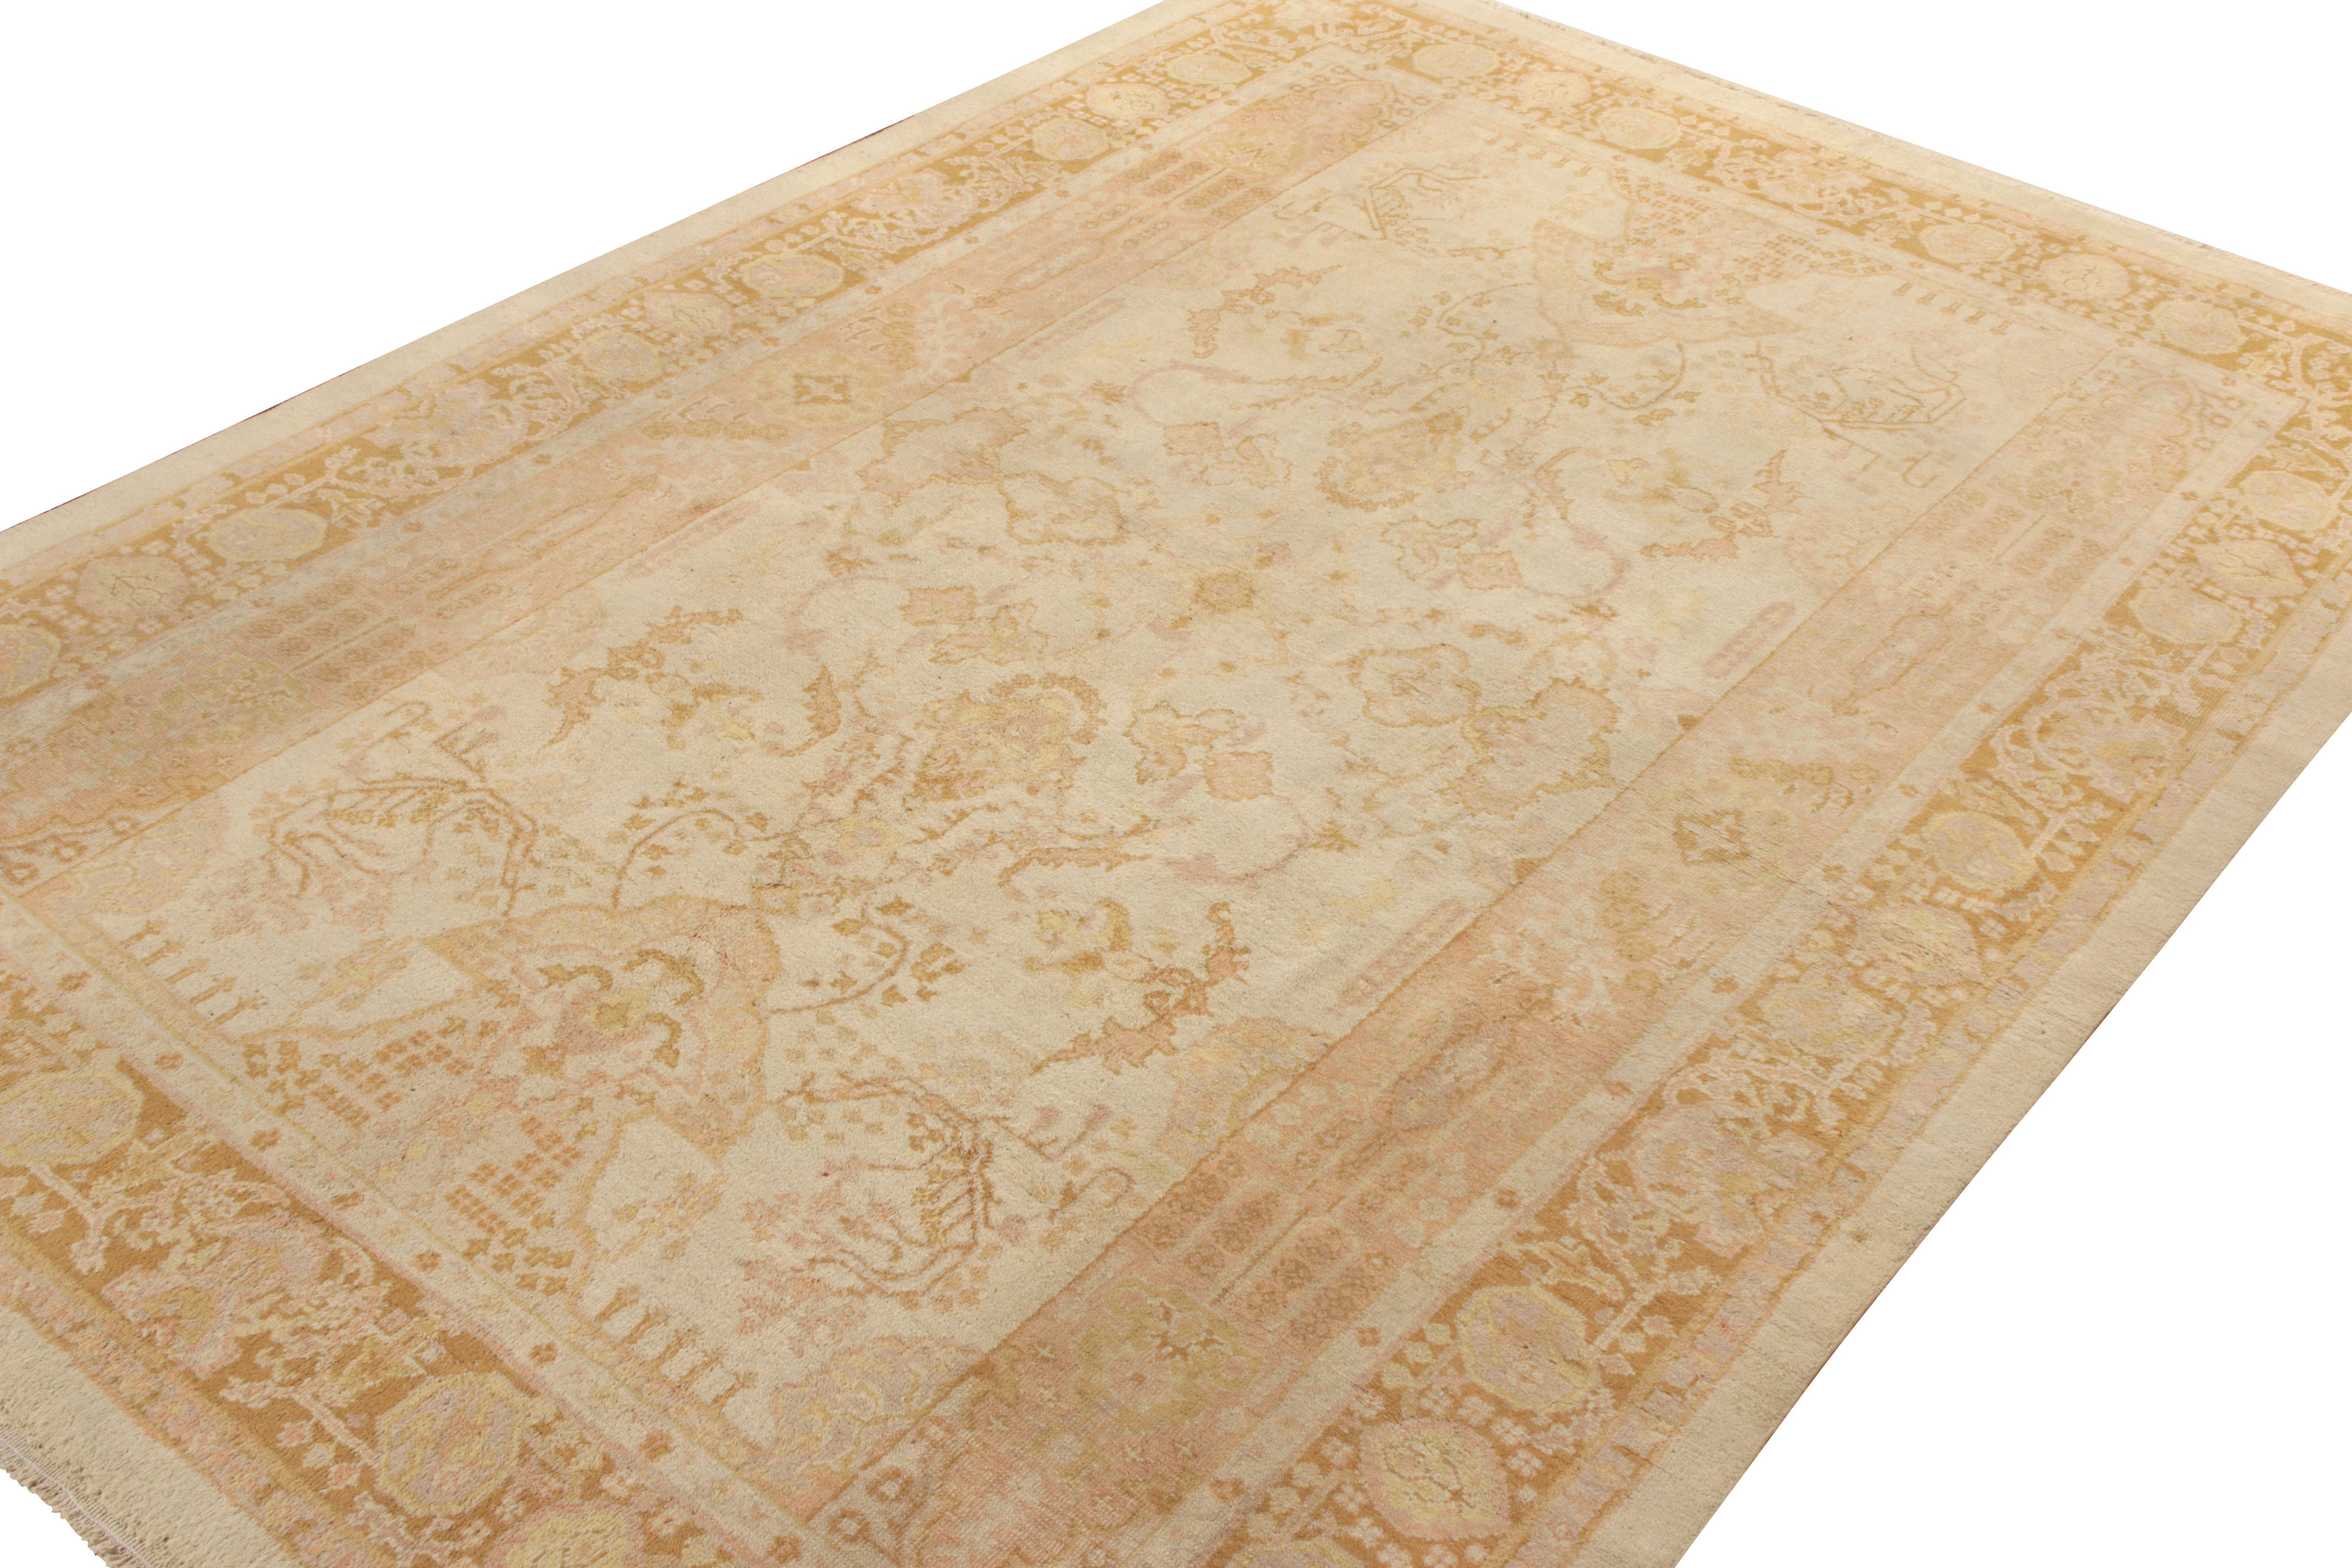 Hand-Knotted Antique Indian Amritsar rug in beige-brown, pink floral pattern In Good Condition For Sale In Long Island City, NY